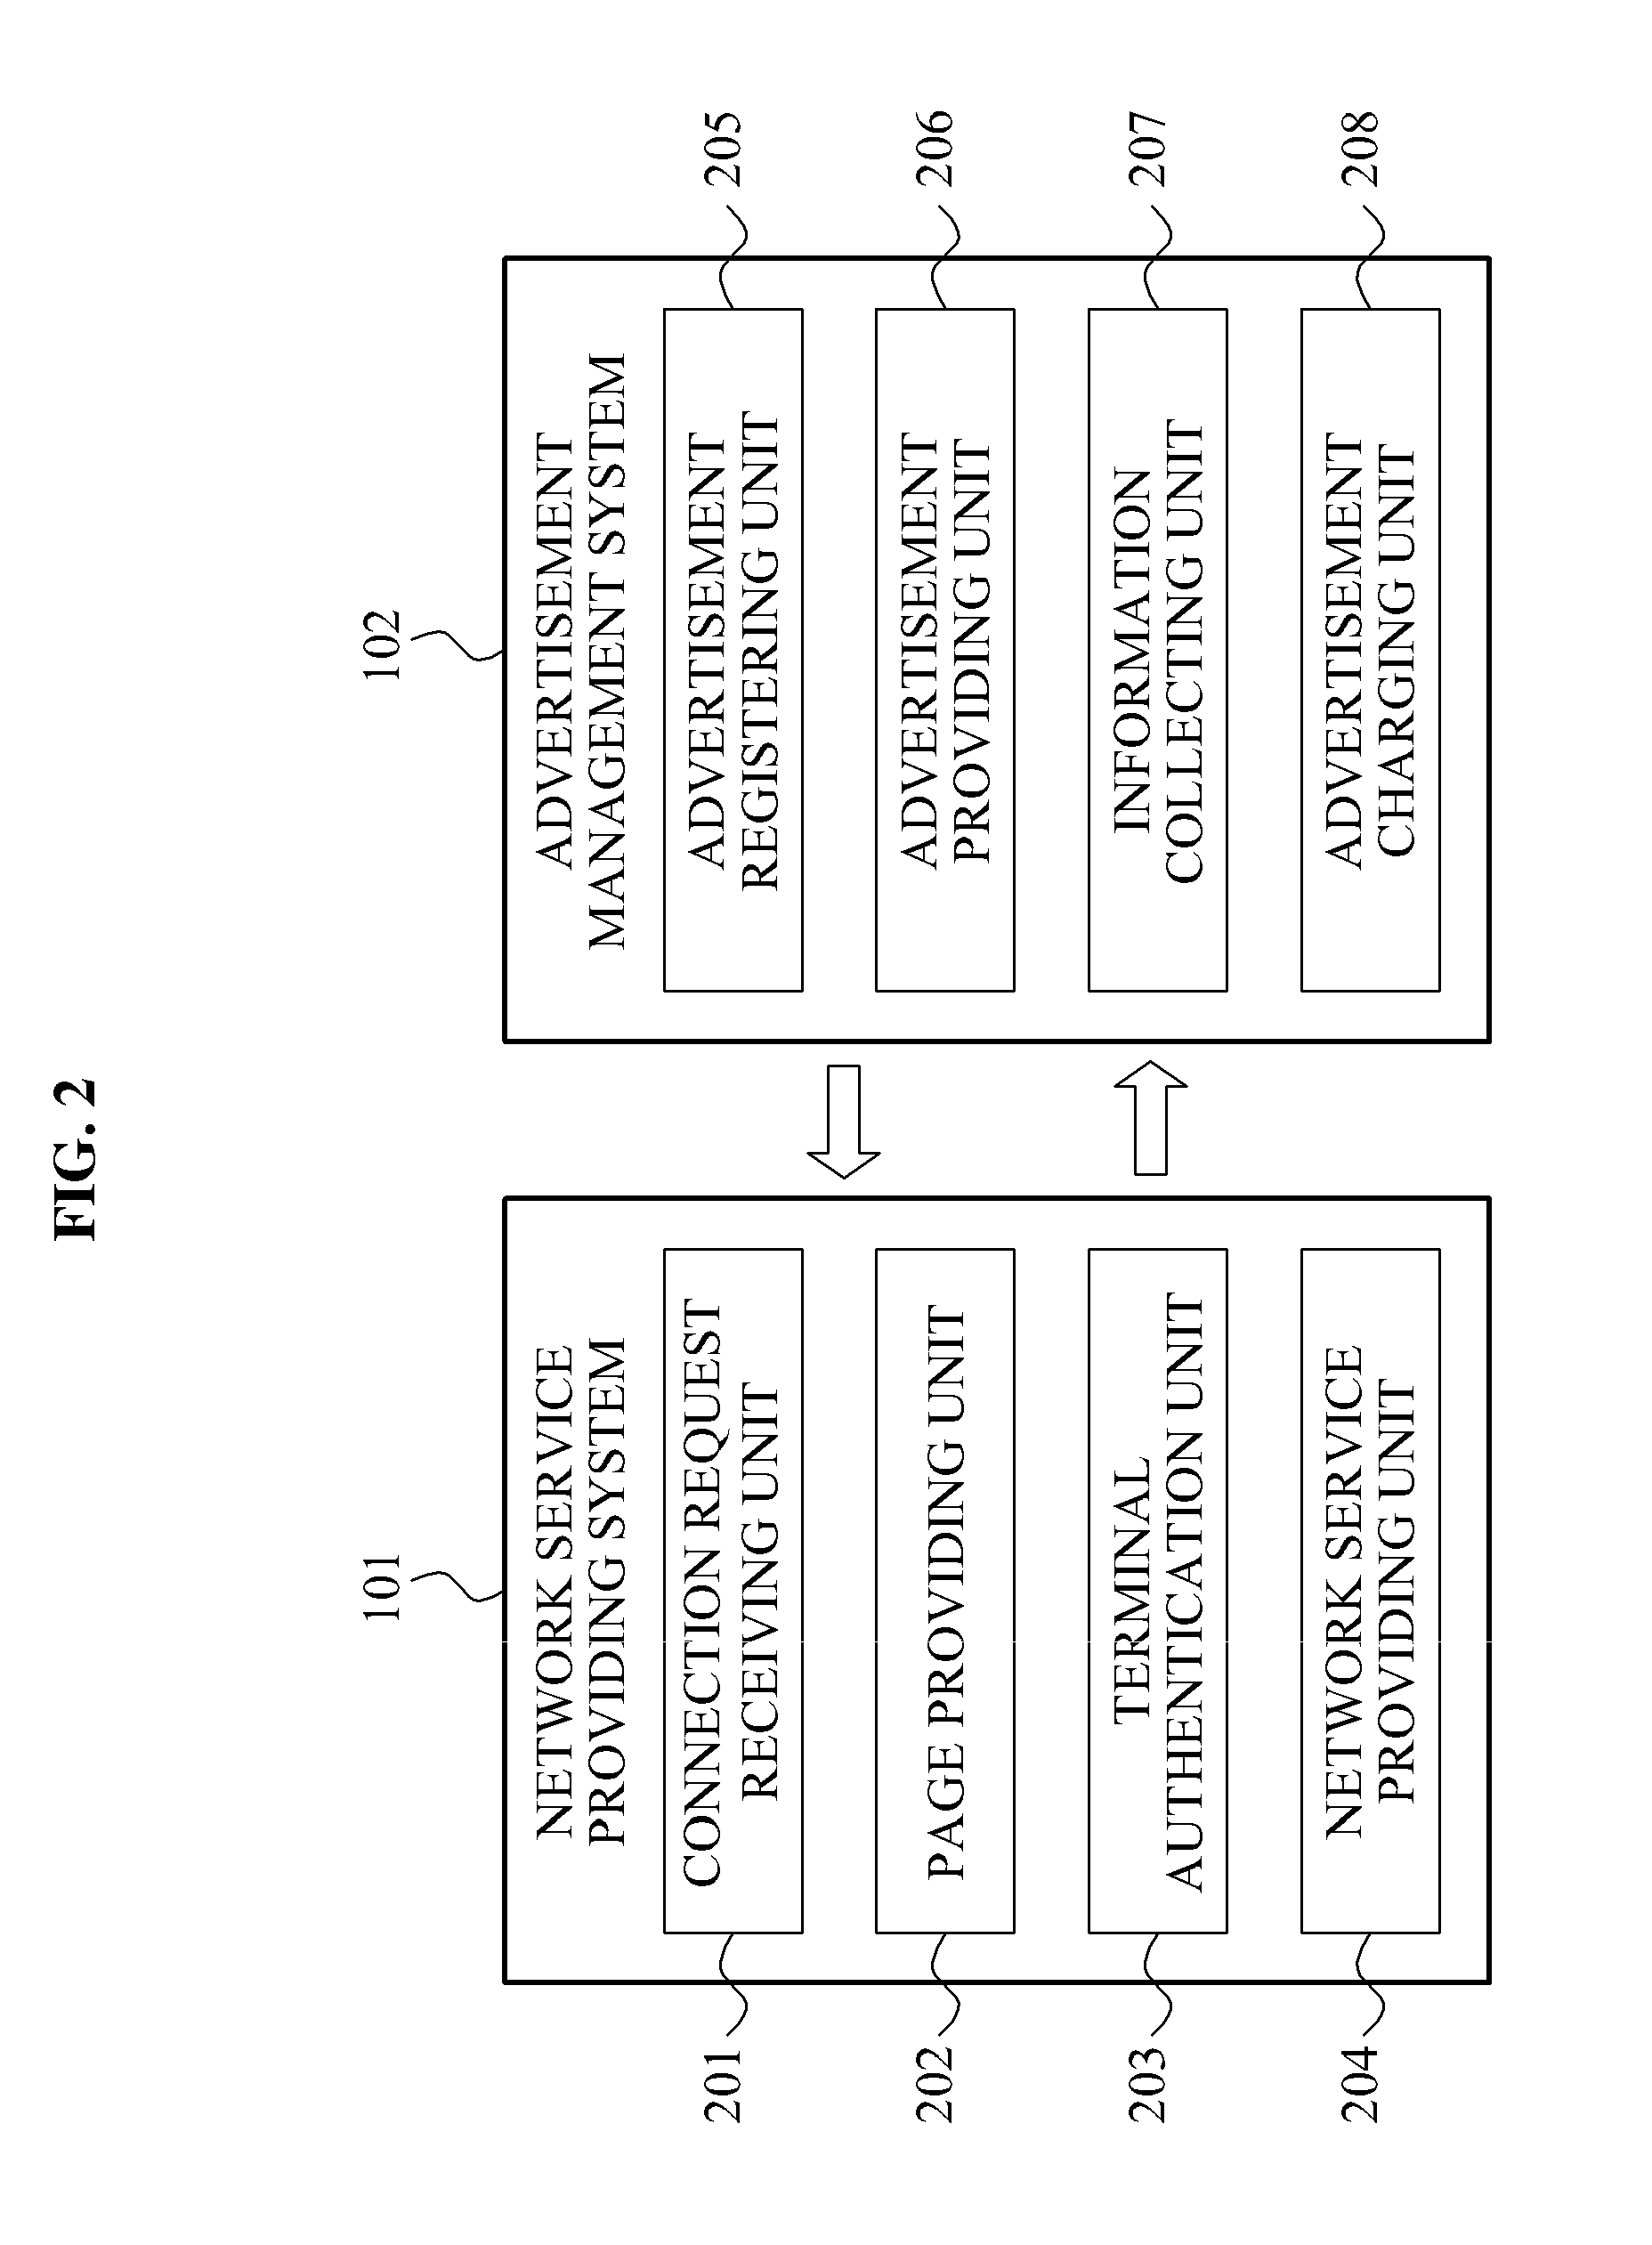 System and method for providing advertisement to wireless network service user